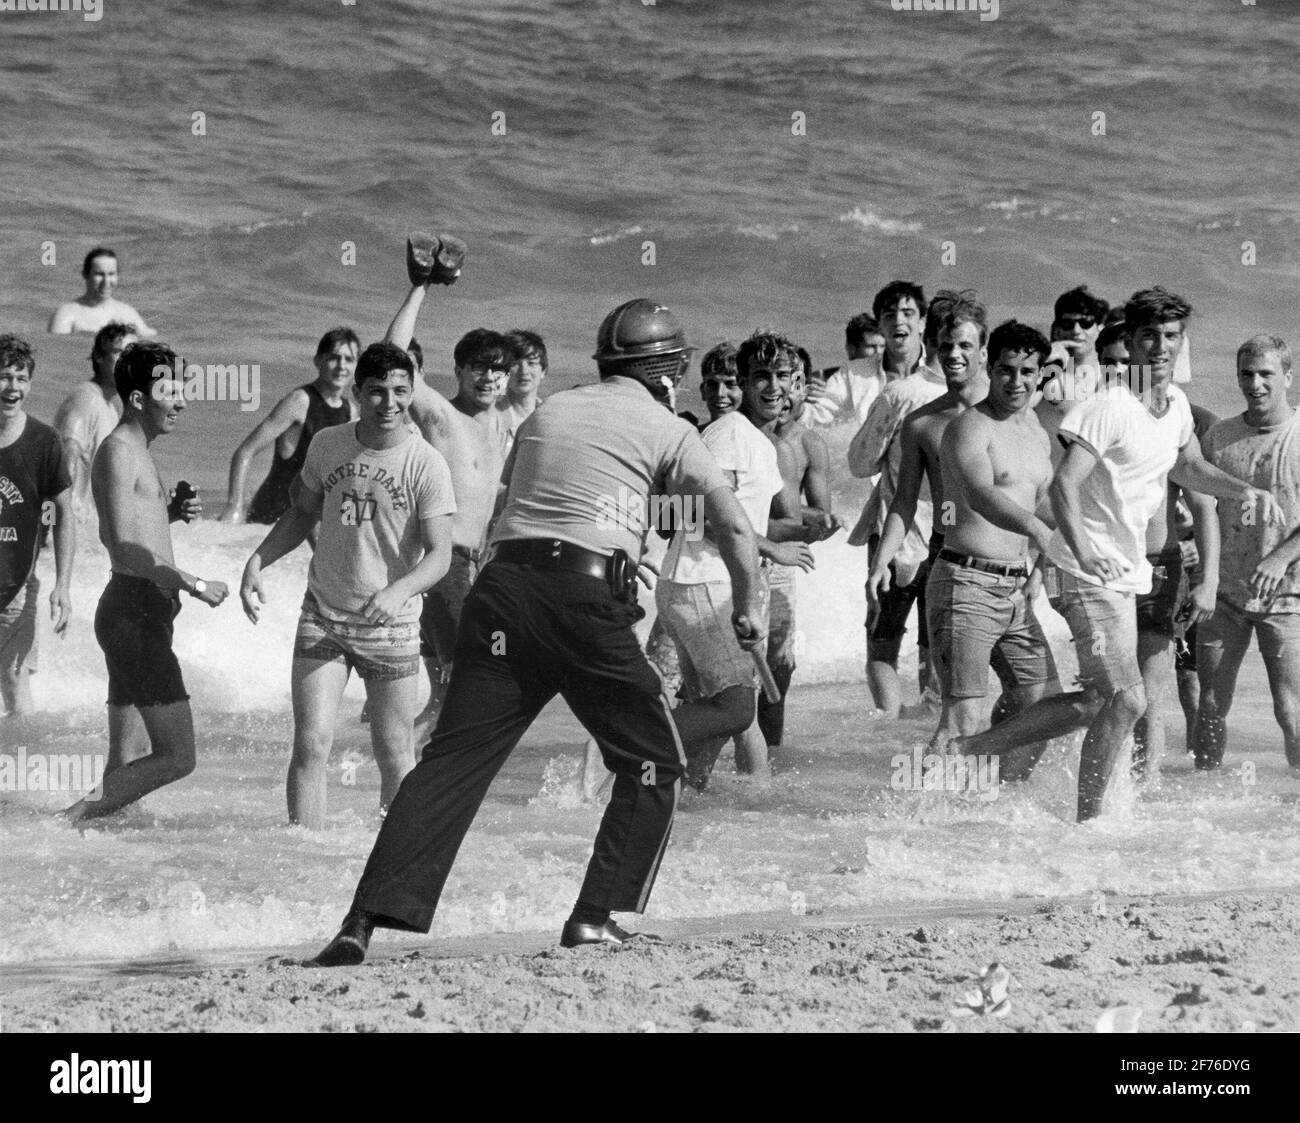 Students riot during Spring Break at Ft. Lauderdale Beach.  Ca. 1960's.. Here taunting a police officer as he chases them into the surf. Stock Photo